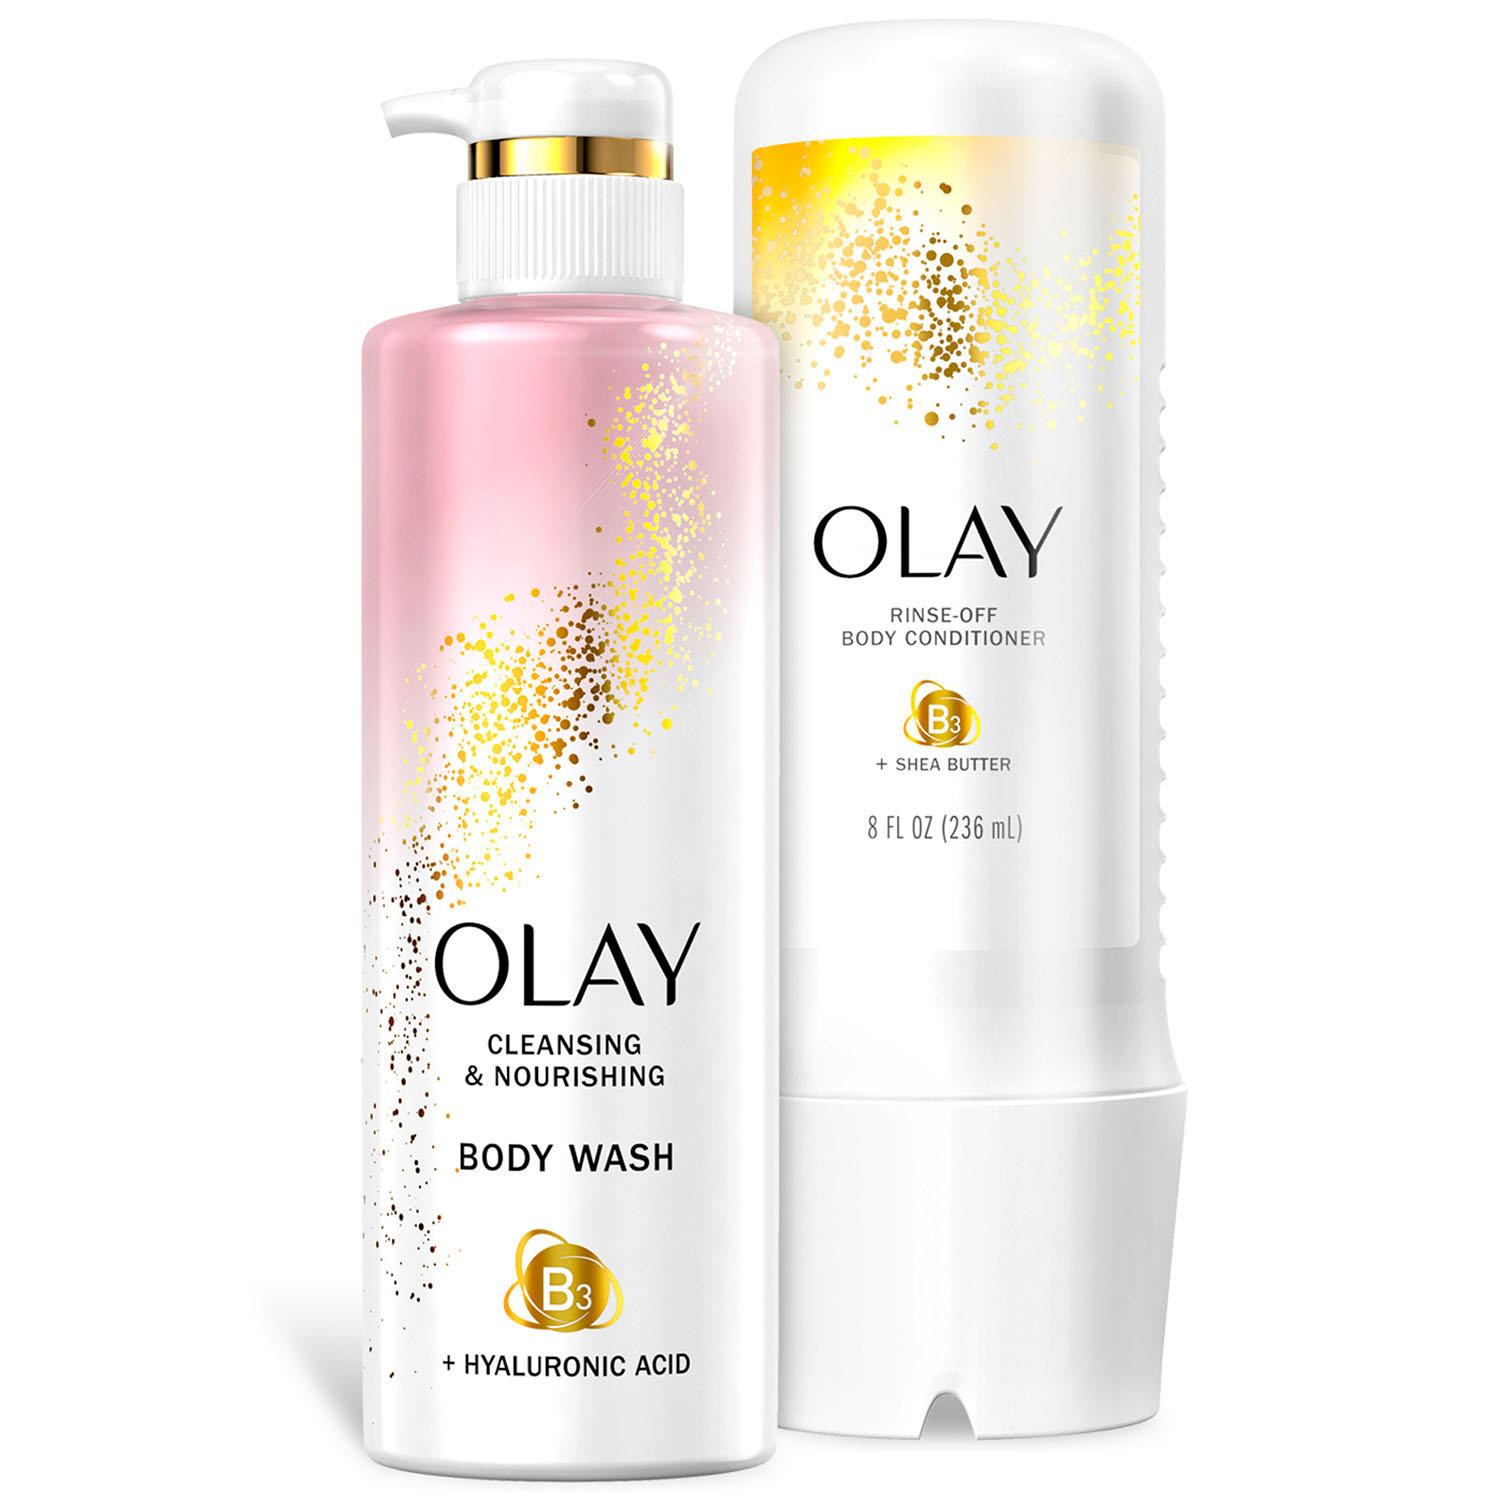 Bottles of Olay cleansing &amp; nourishing body wash and rinse-off body conditioner